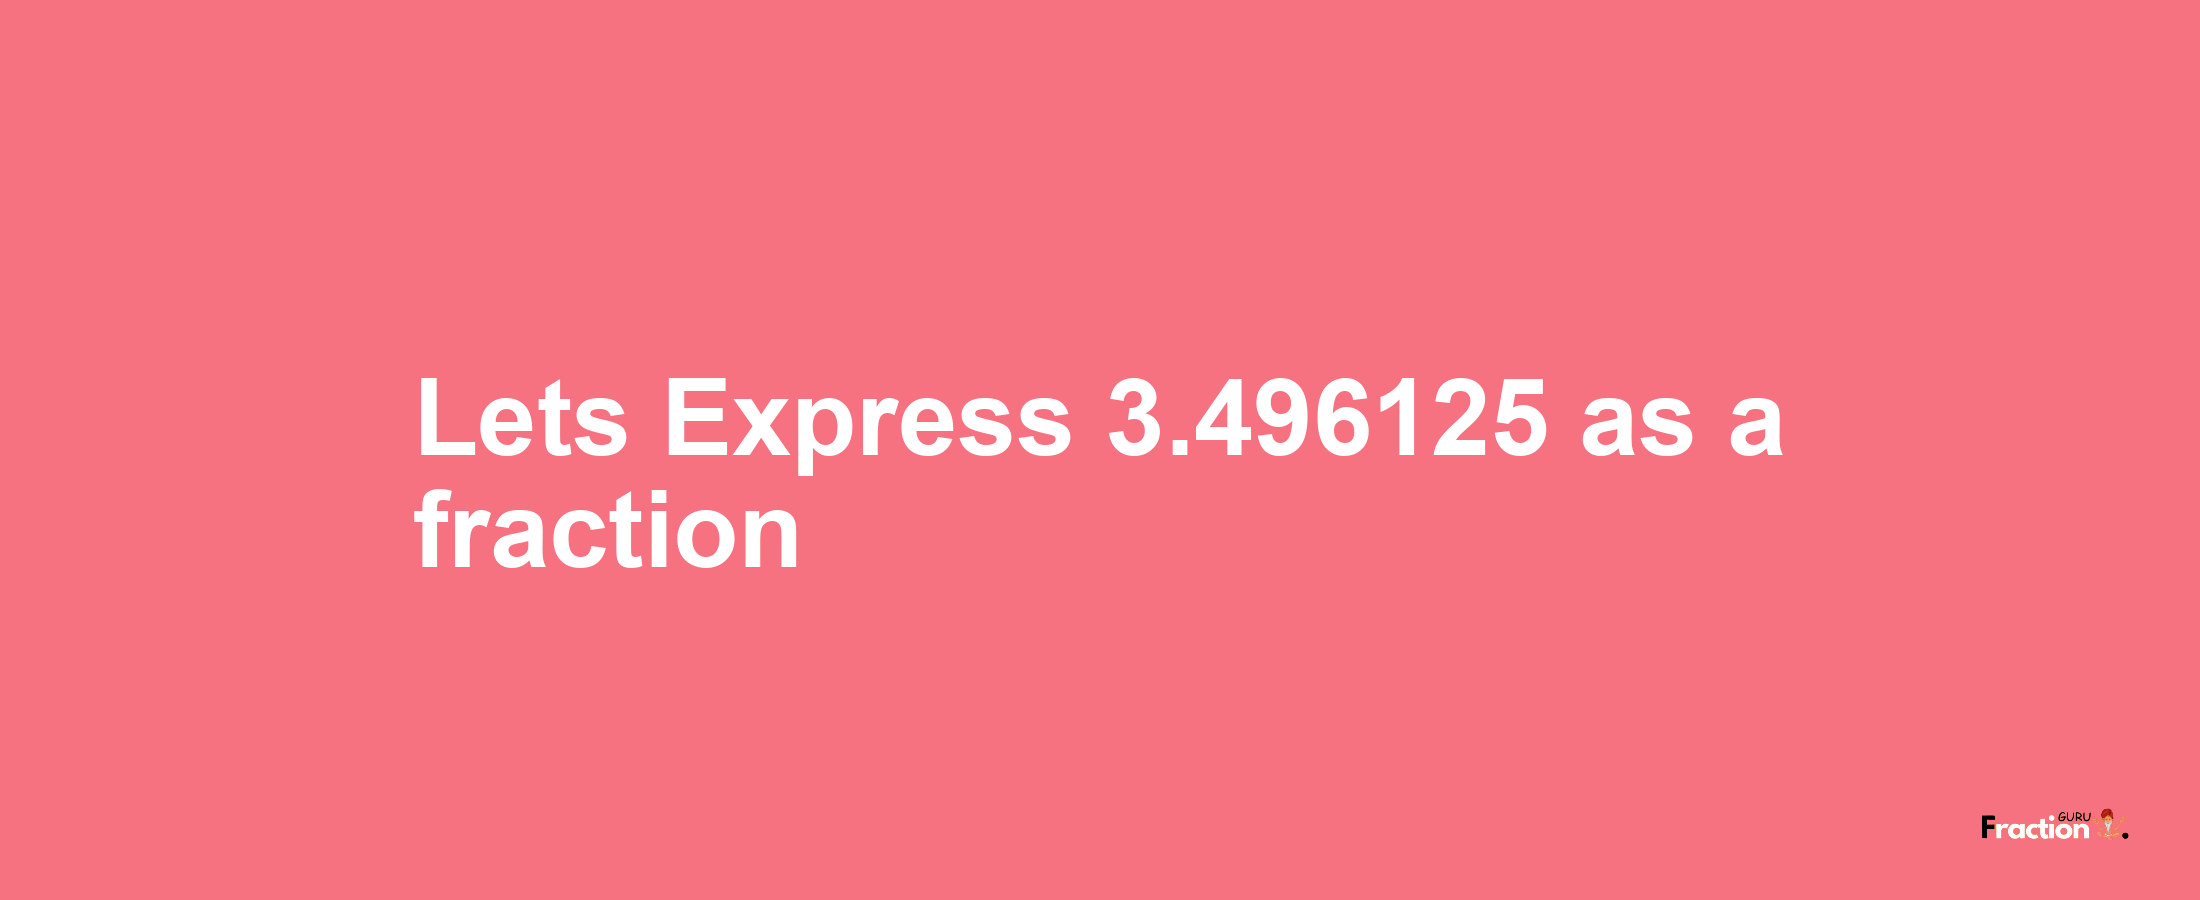 Lets Express 3.496125 as afraction